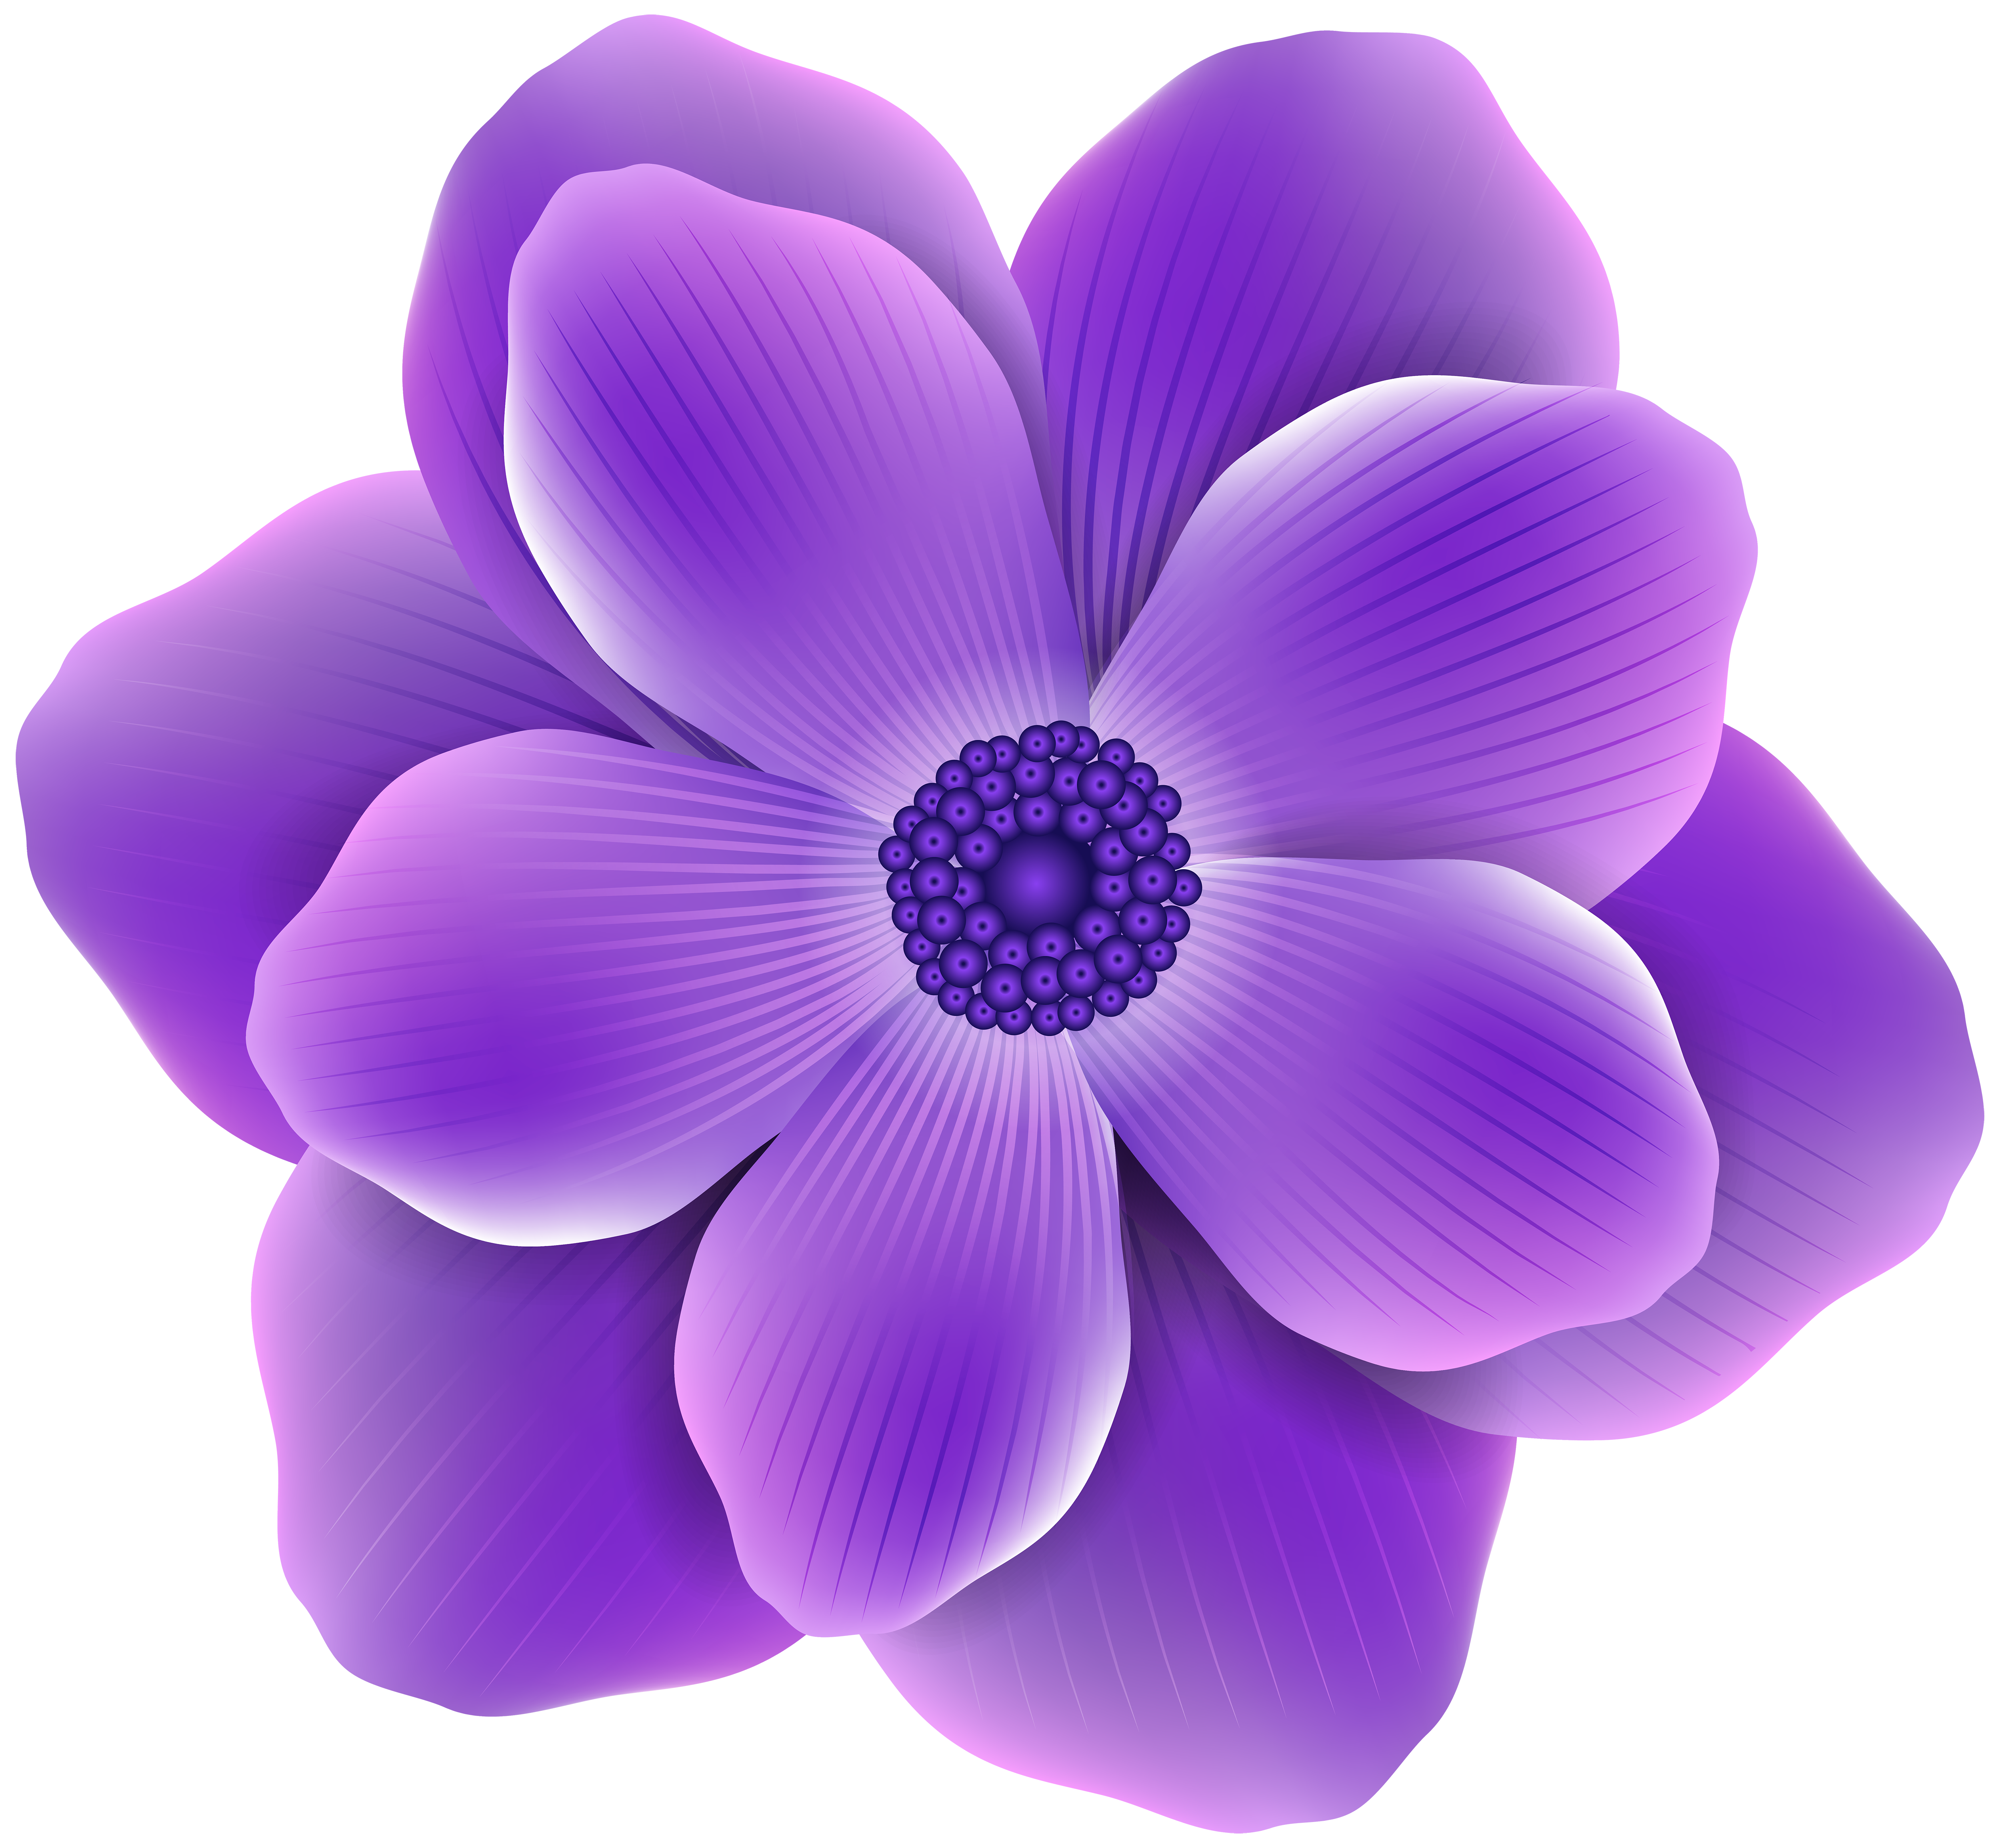 Purple Flower PNG Clip Art Image | Gallery Yopriceville - High ...